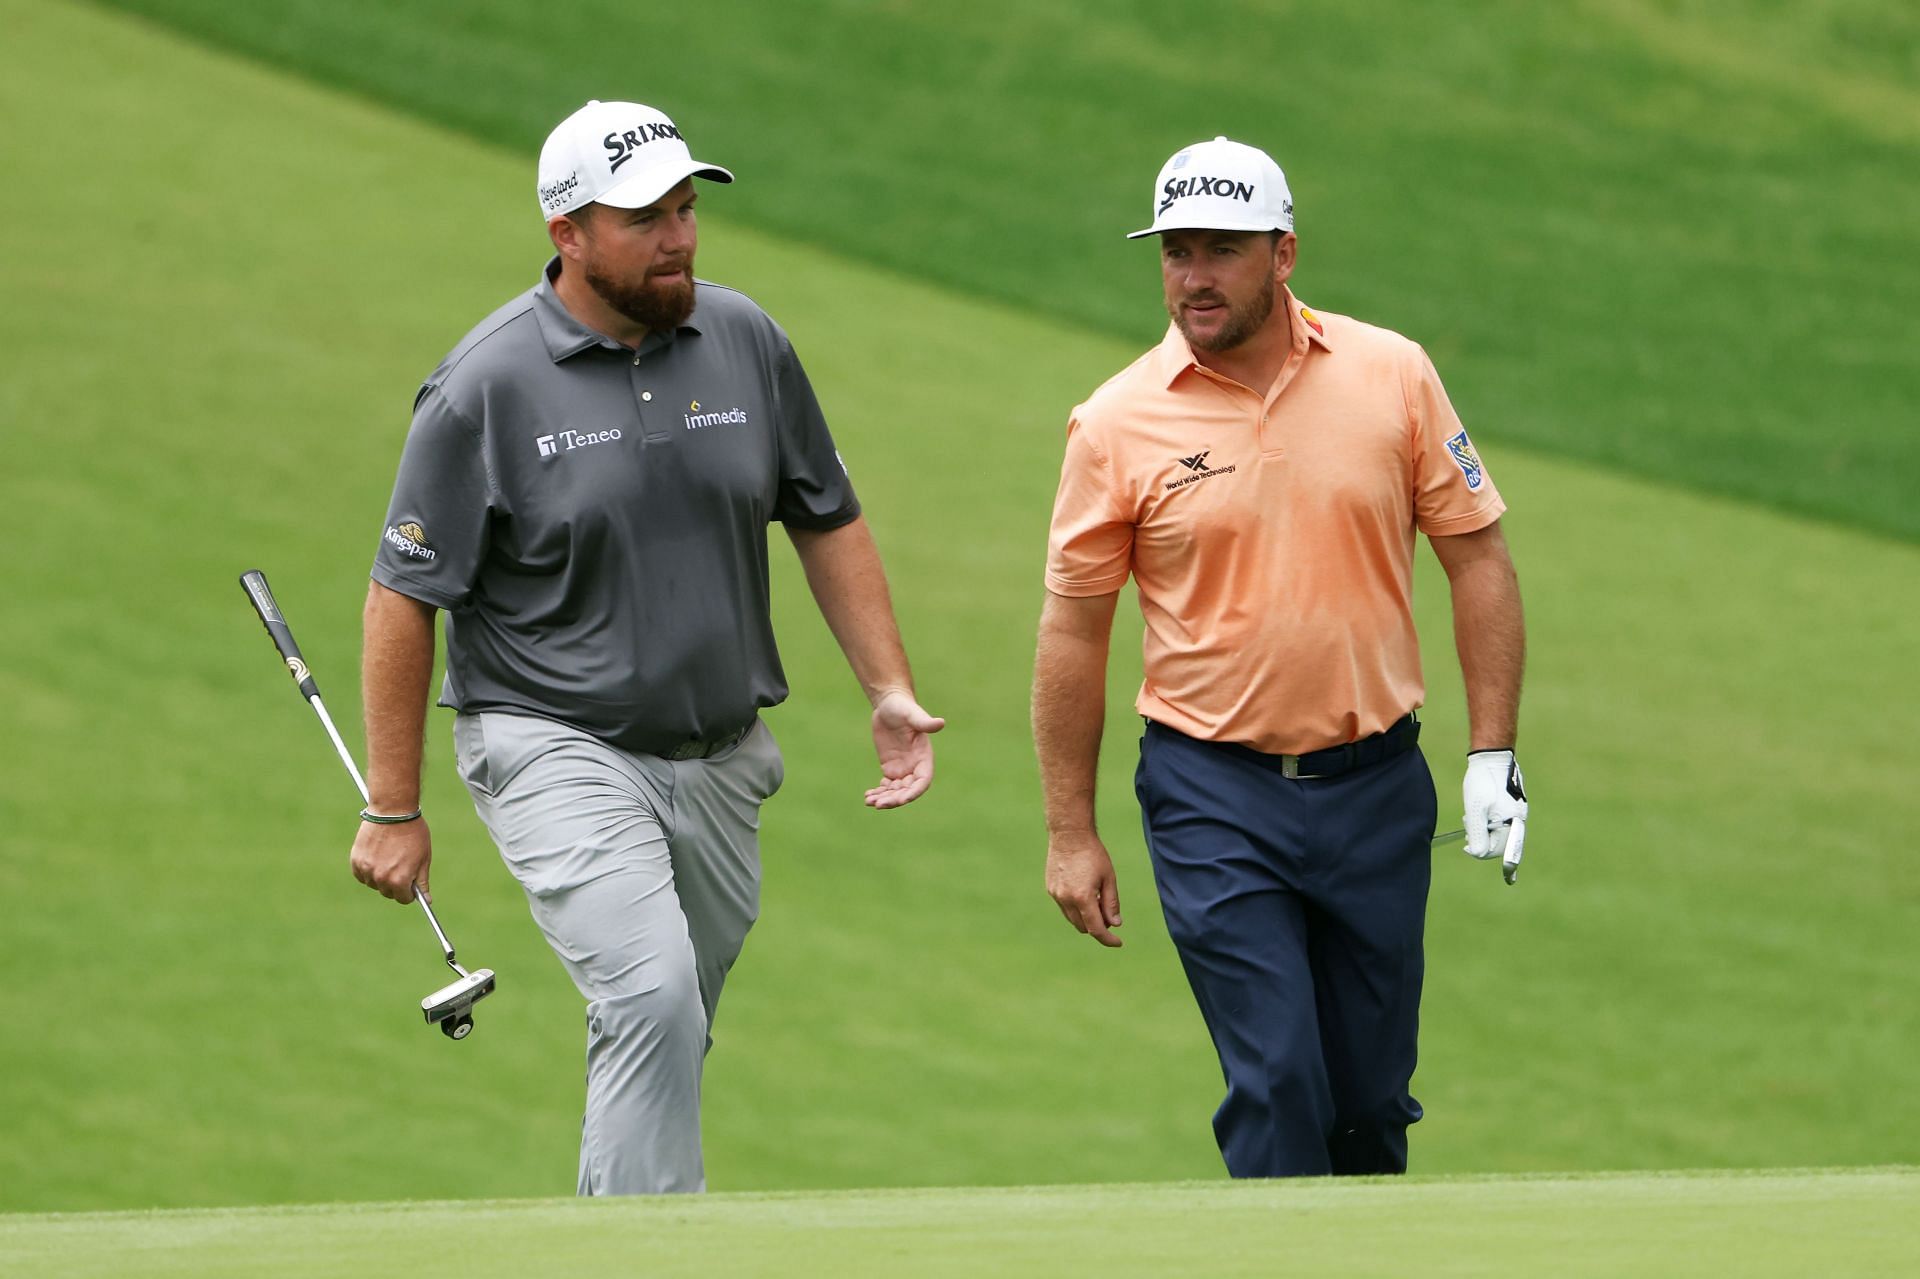 Shane Lowry and Graeme McDowell (via Getty Images)